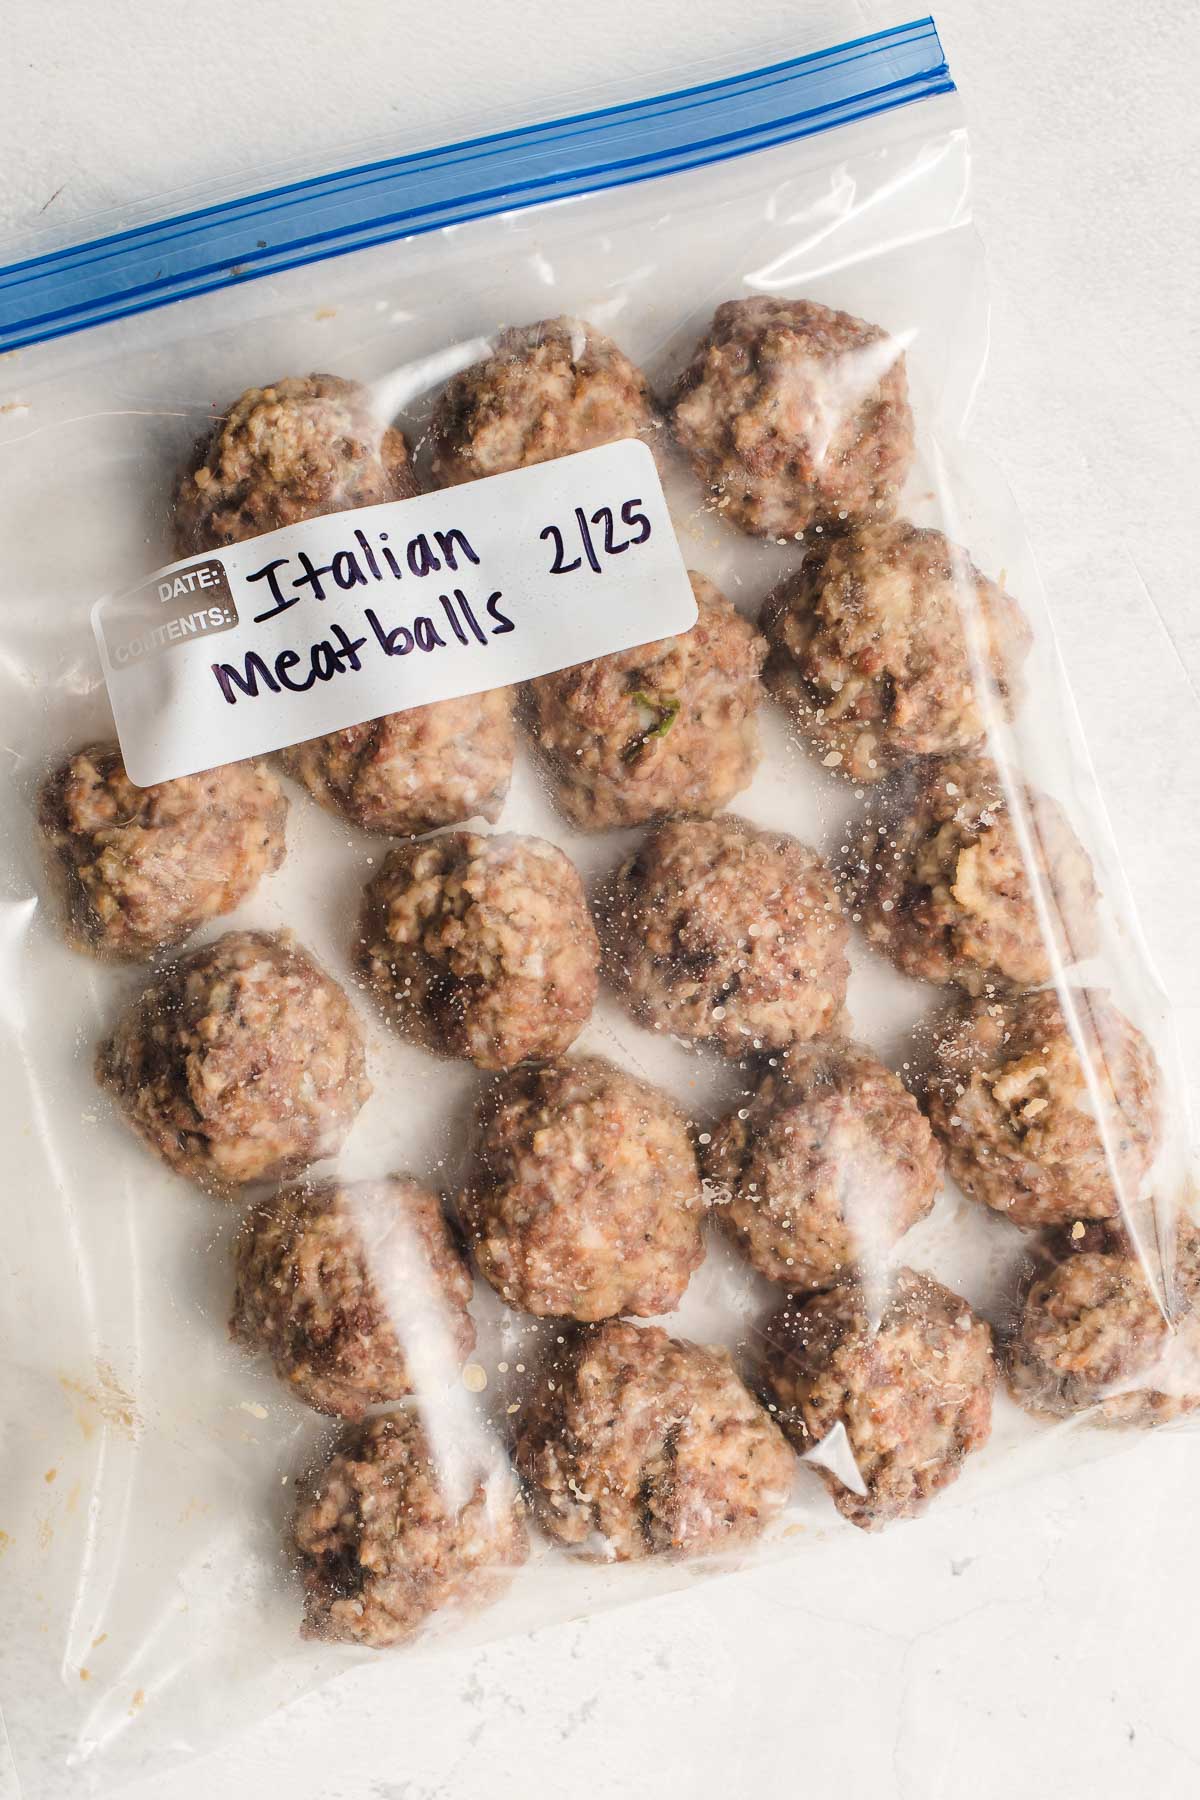 Italian meatballs shown in a ziplock bag, labeled for freezing.